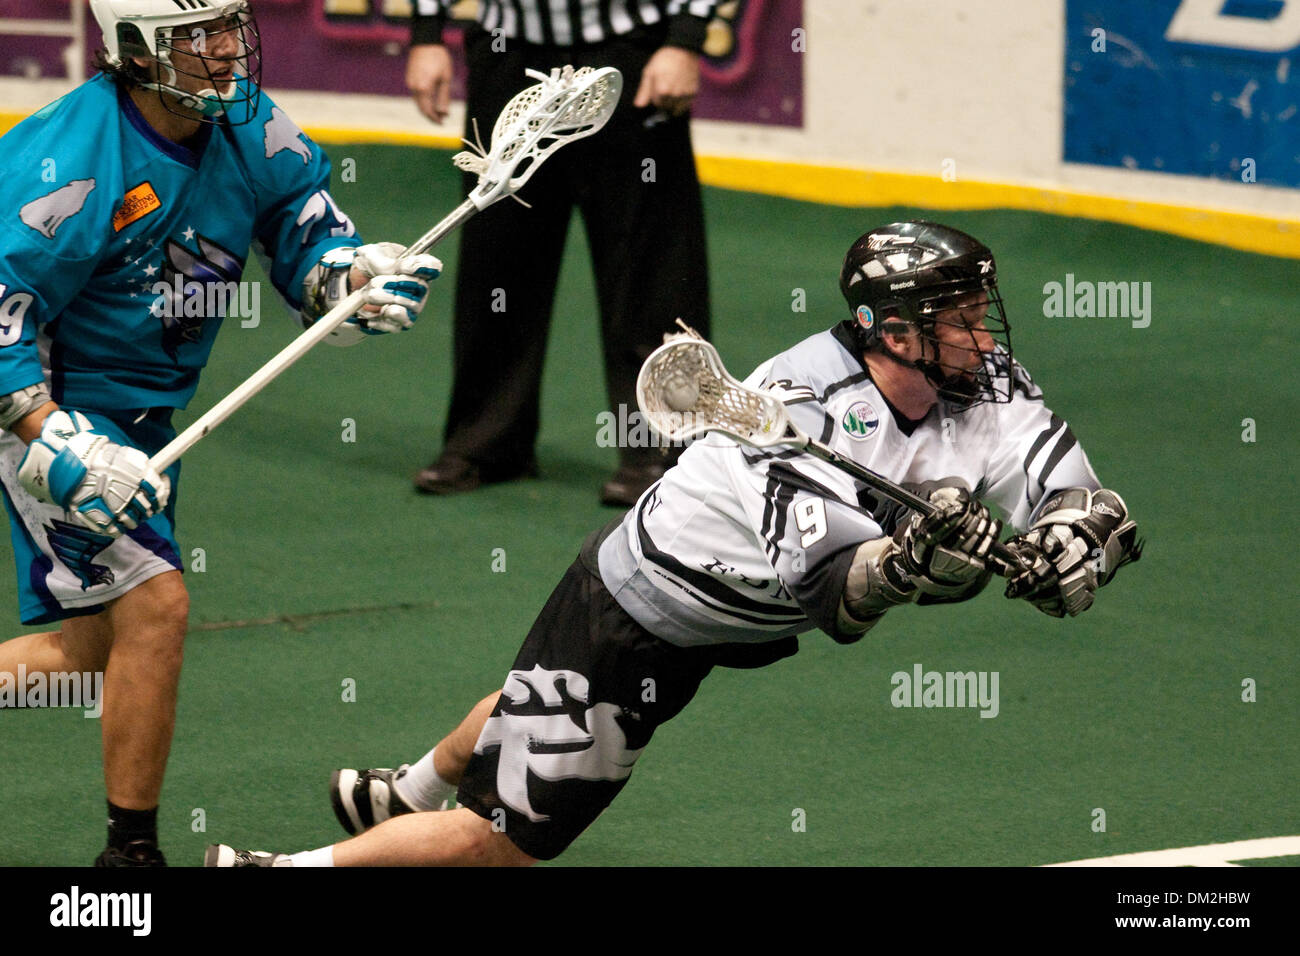 Edmonton Rush forward Gavin Prout (9) dives to take a shot on goal while Rochester Knighthawks defender Sid Smith (79) looks on. Edmonton defeated Rochester 12-11 at the Blue Cross Arena in Rochester, NY. (Credit Image: © Mark Konezny/Southcreek Global/ZUMApress.com) Stock Photo